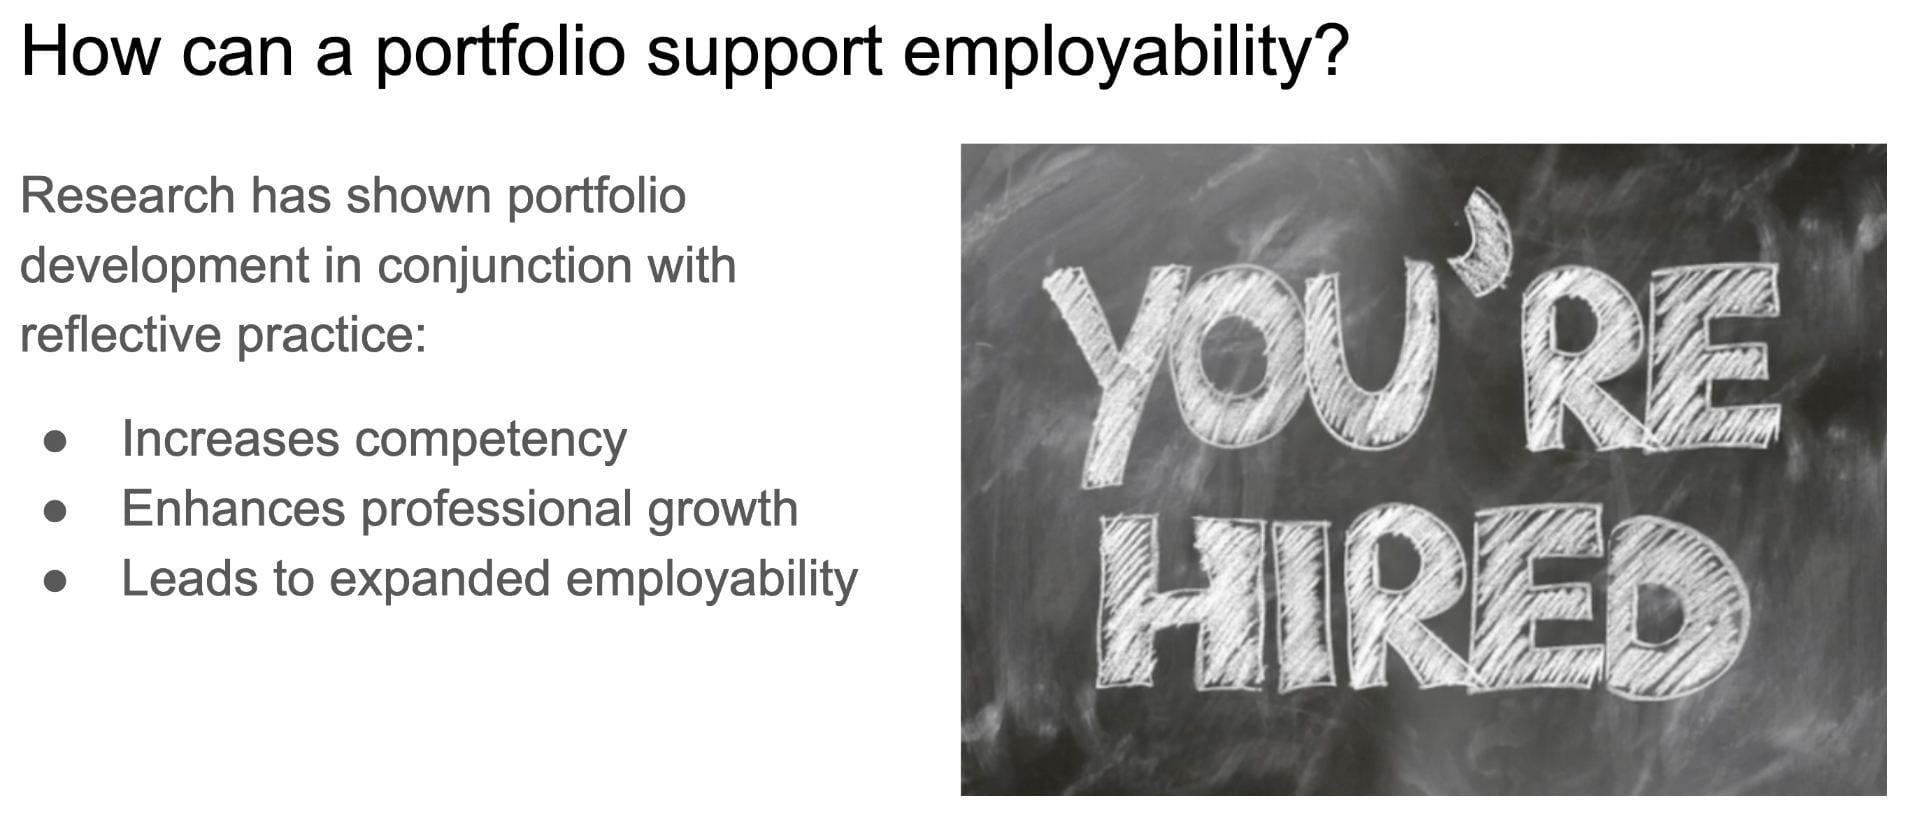 You're Hired Slide. How can a portfolio support employability?